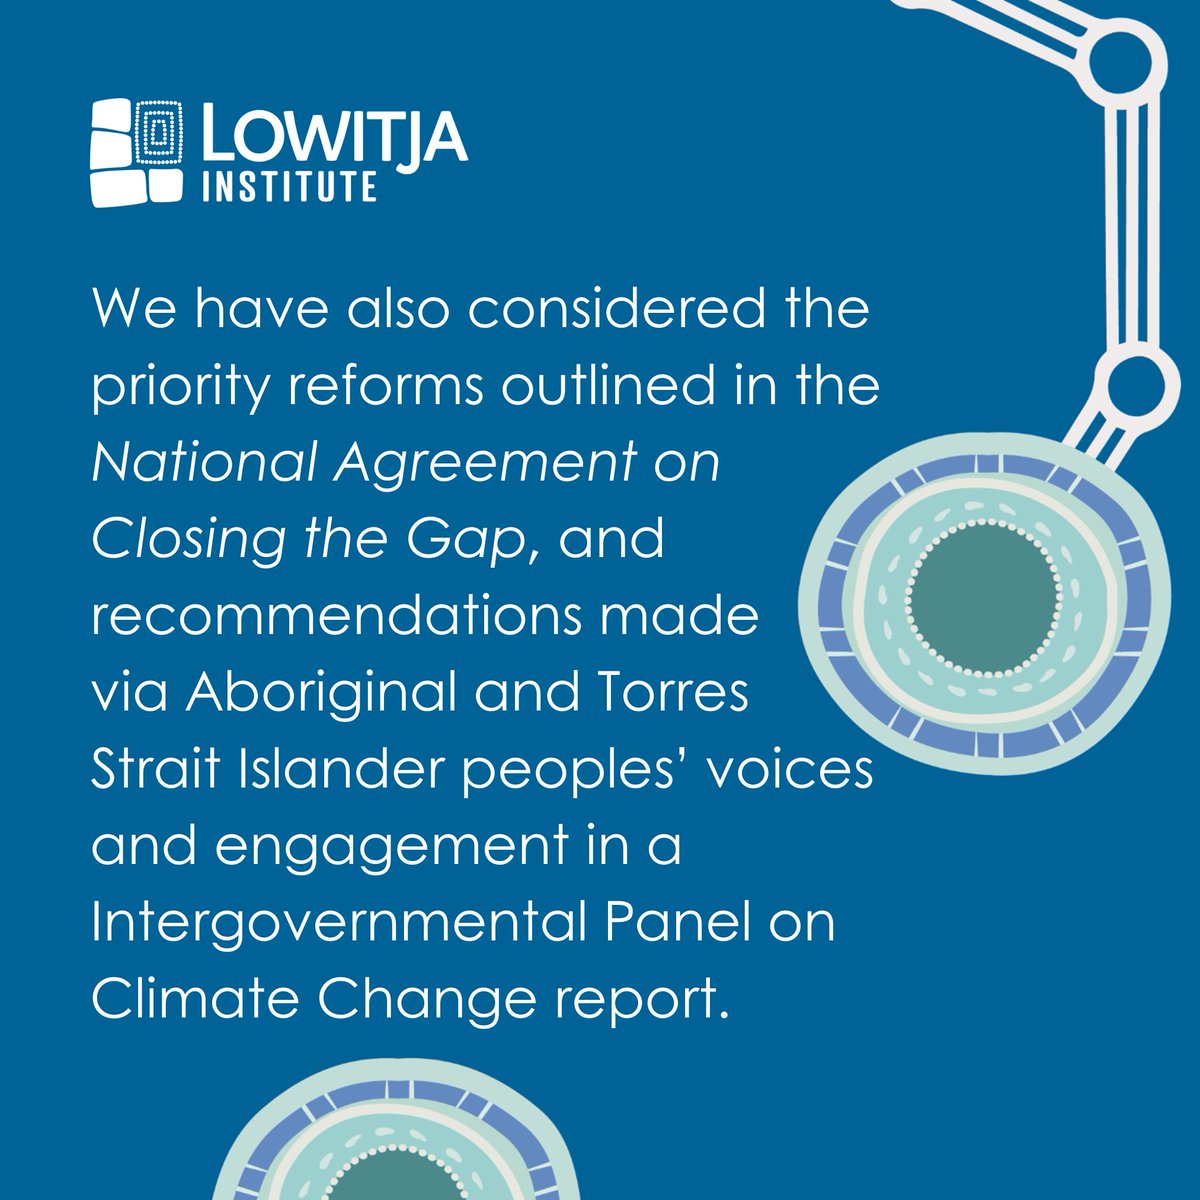 Lowitja Institute's latest policy position paper recommends that the government funds the establishment of an Aboriginal and Torres Strait Islander Coalition on Climate and Health. Read the full paper here- lnkd.in/gcc3FDdS #climatechange #health